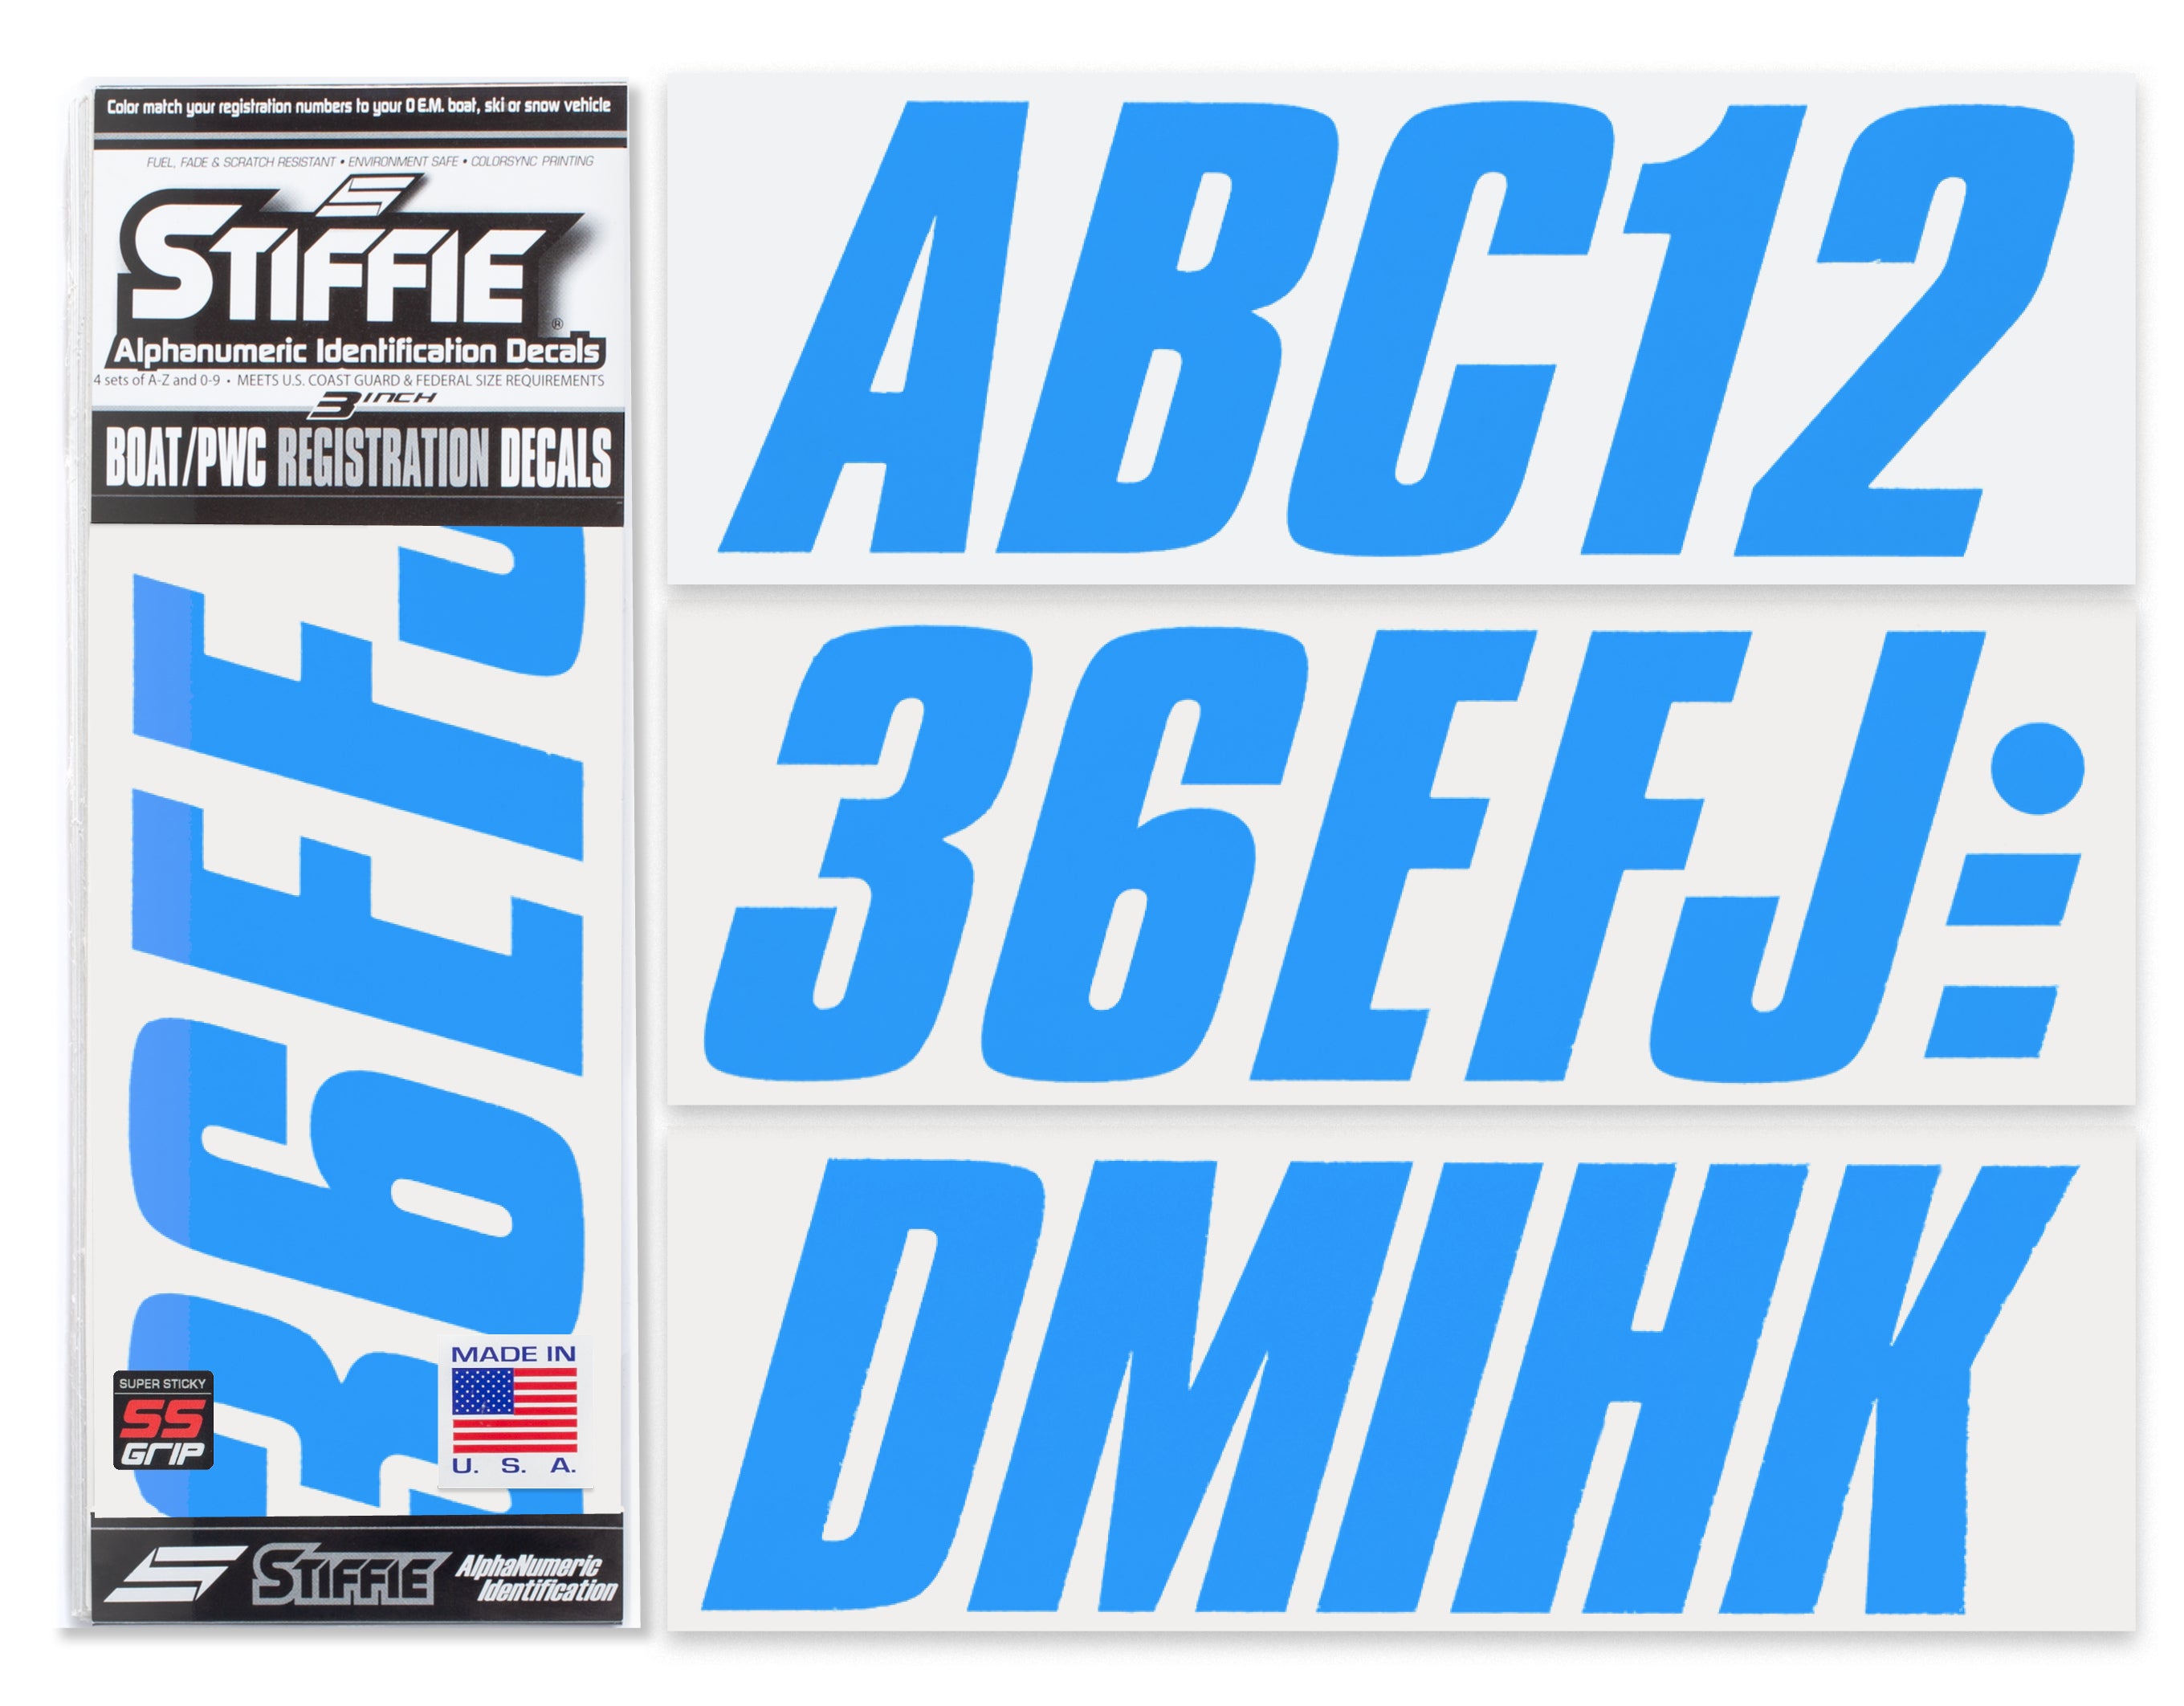 STIFFIE Shift Blueberry Super Sticky 3" Alpha Numeric Registration Identification Numbers Stickers Decals for Sea-Doo Spark, Inflatable Boats, Ribs, Hypalon/PVC, PWC and Boats.